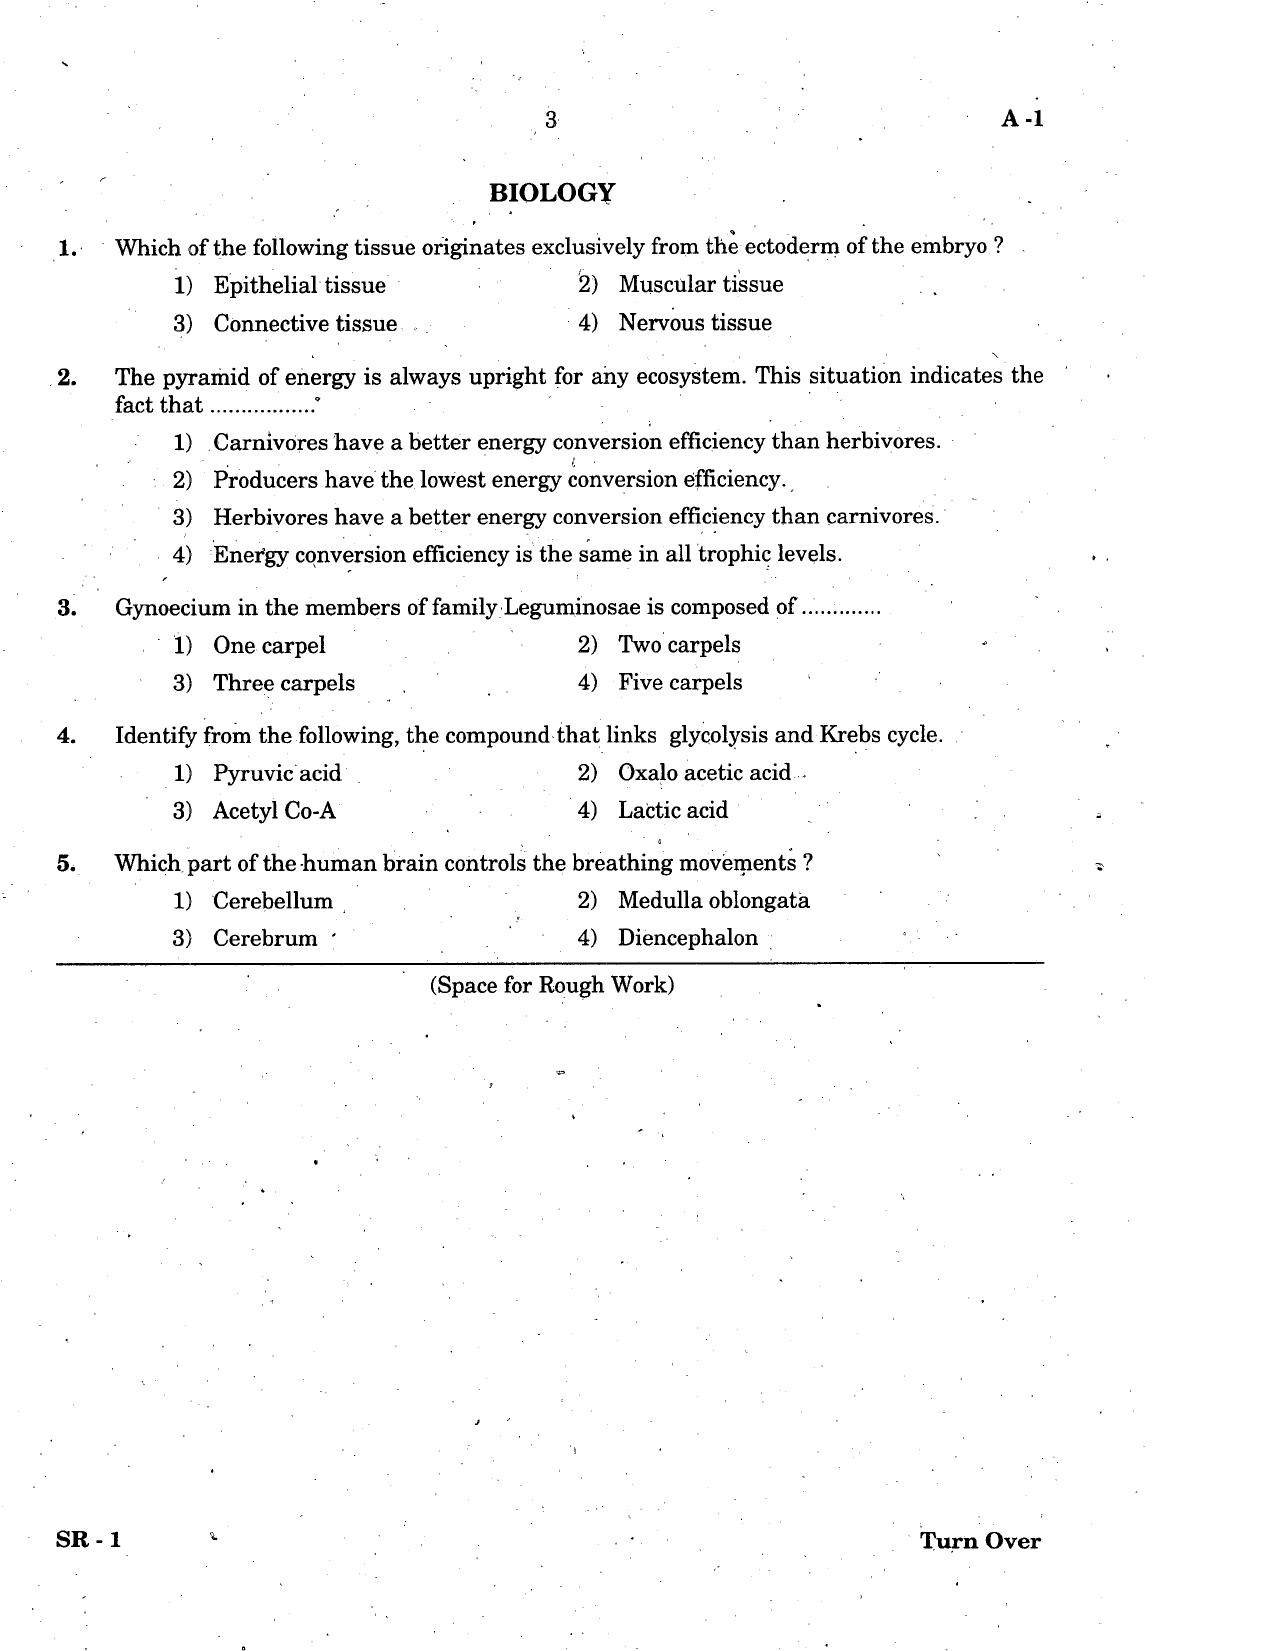 KCET Biology 2005 Question Papers - Page 3